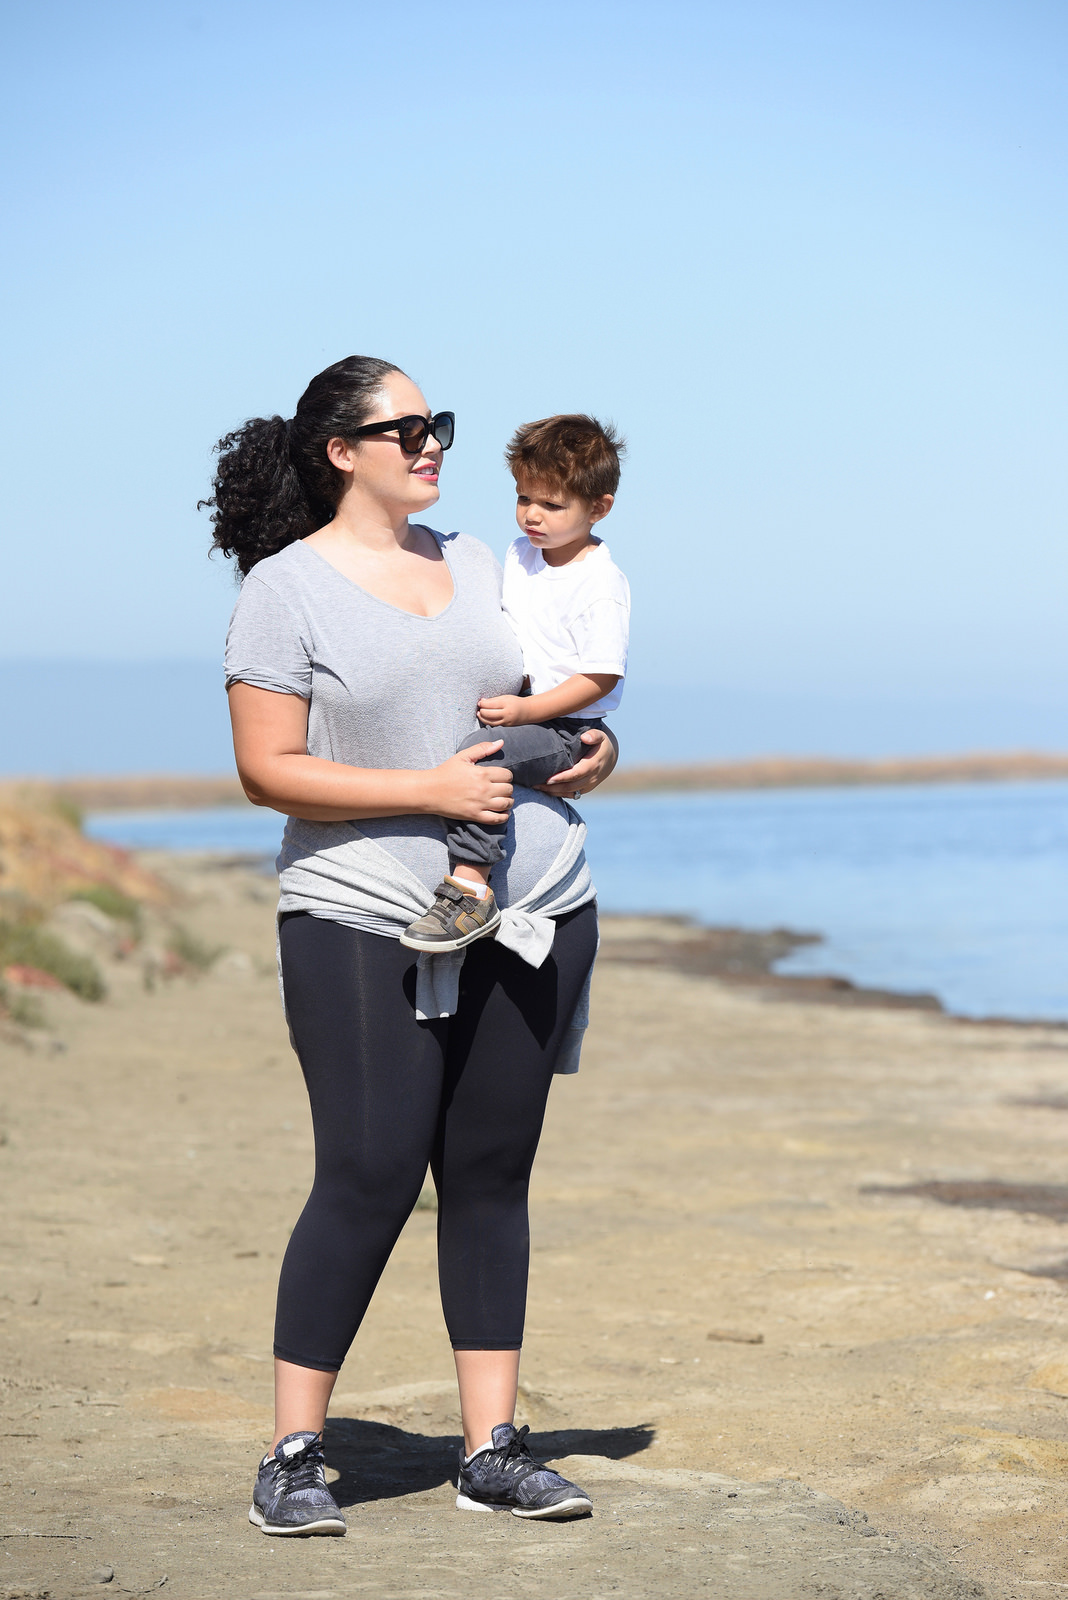 Tanesha Awasthi (formerly known as Girl with Curves) wearing workout clothing with her son at the Alviso Marina County Park in the San Francisco Bay Area.